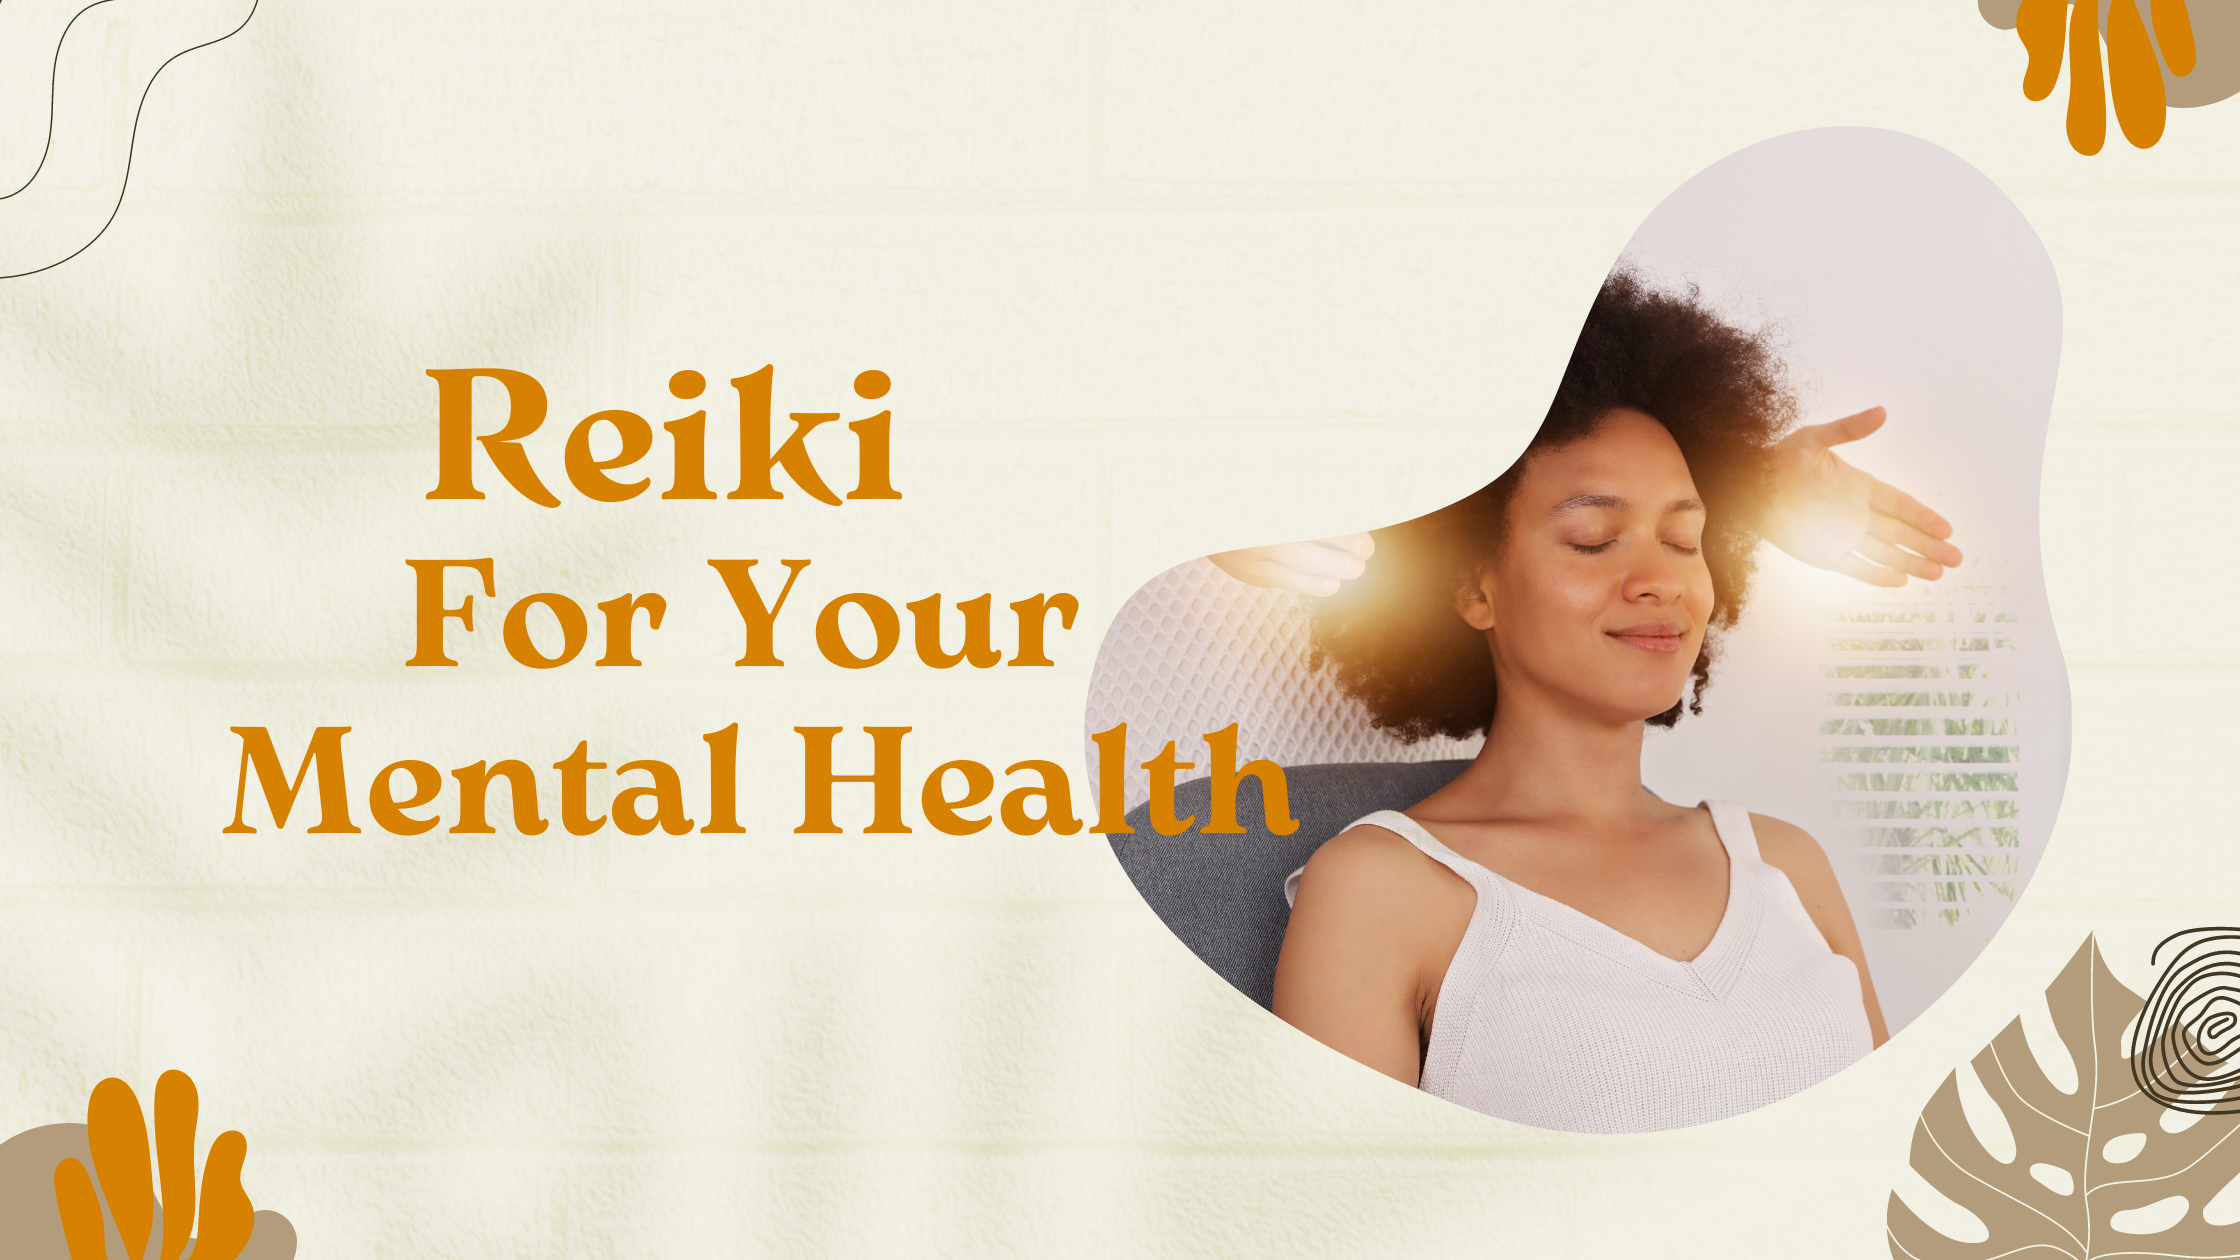 Reiki produces a tremendous level of peace, calm and relaxation, which can only help those with mental health problems, regardless of what the diagnosis may be.